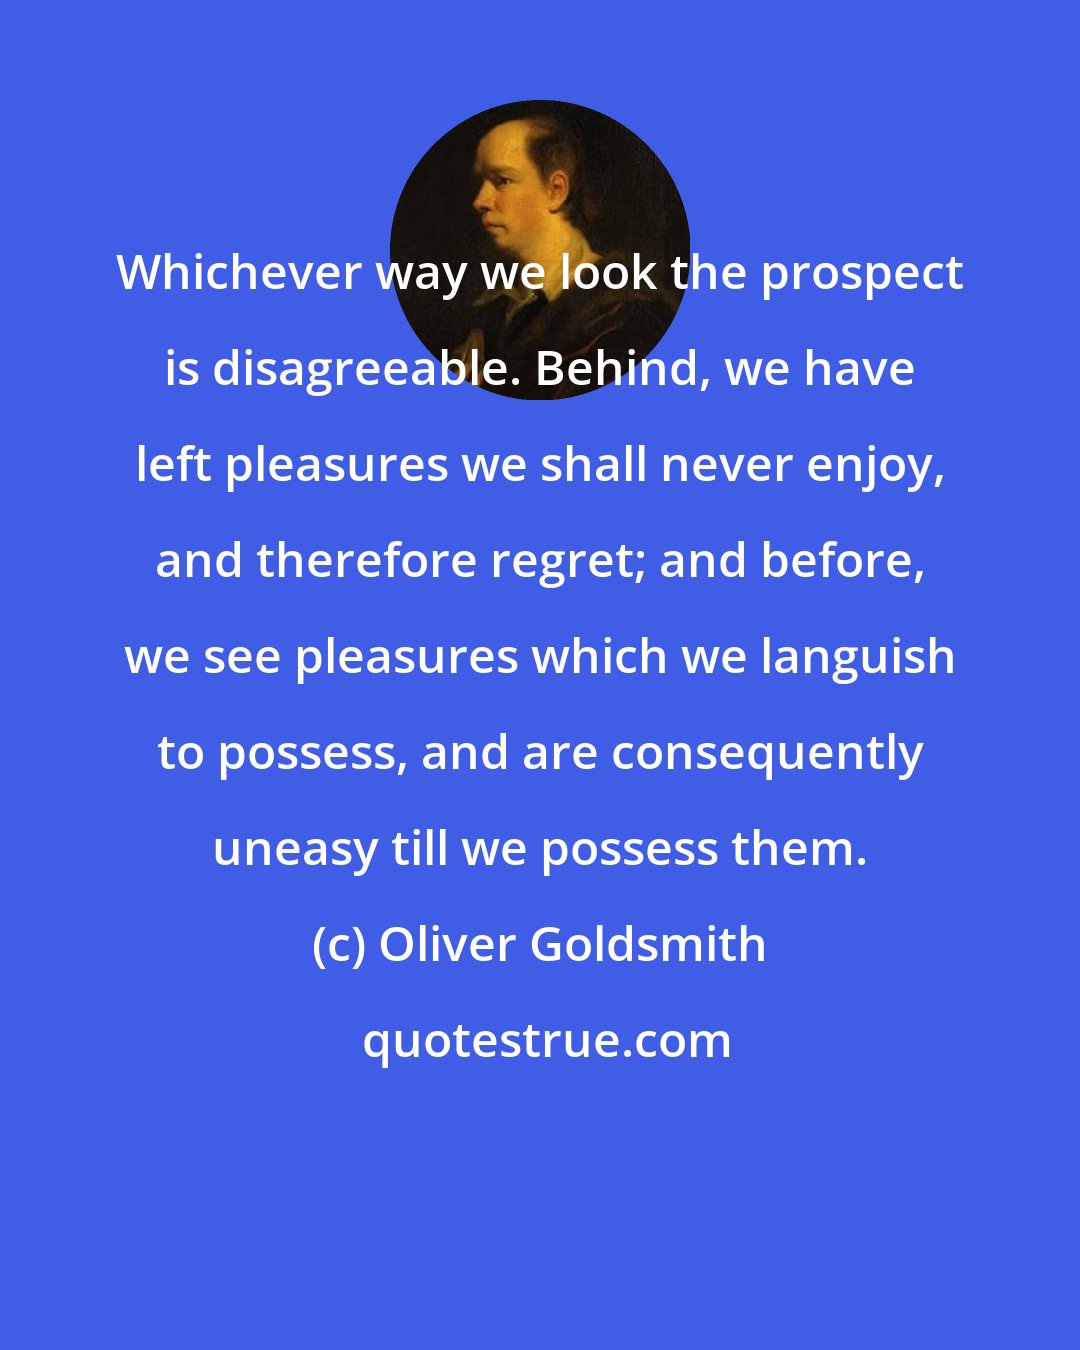 Oliver Goldsmith: Whichever way we look the prospect is disagreeable. Behind, we have left pleasures we shall never enjoy, and therefore regret; and before, we see pleasures which we languish to possess, and are consequently uneasy till we possess them.